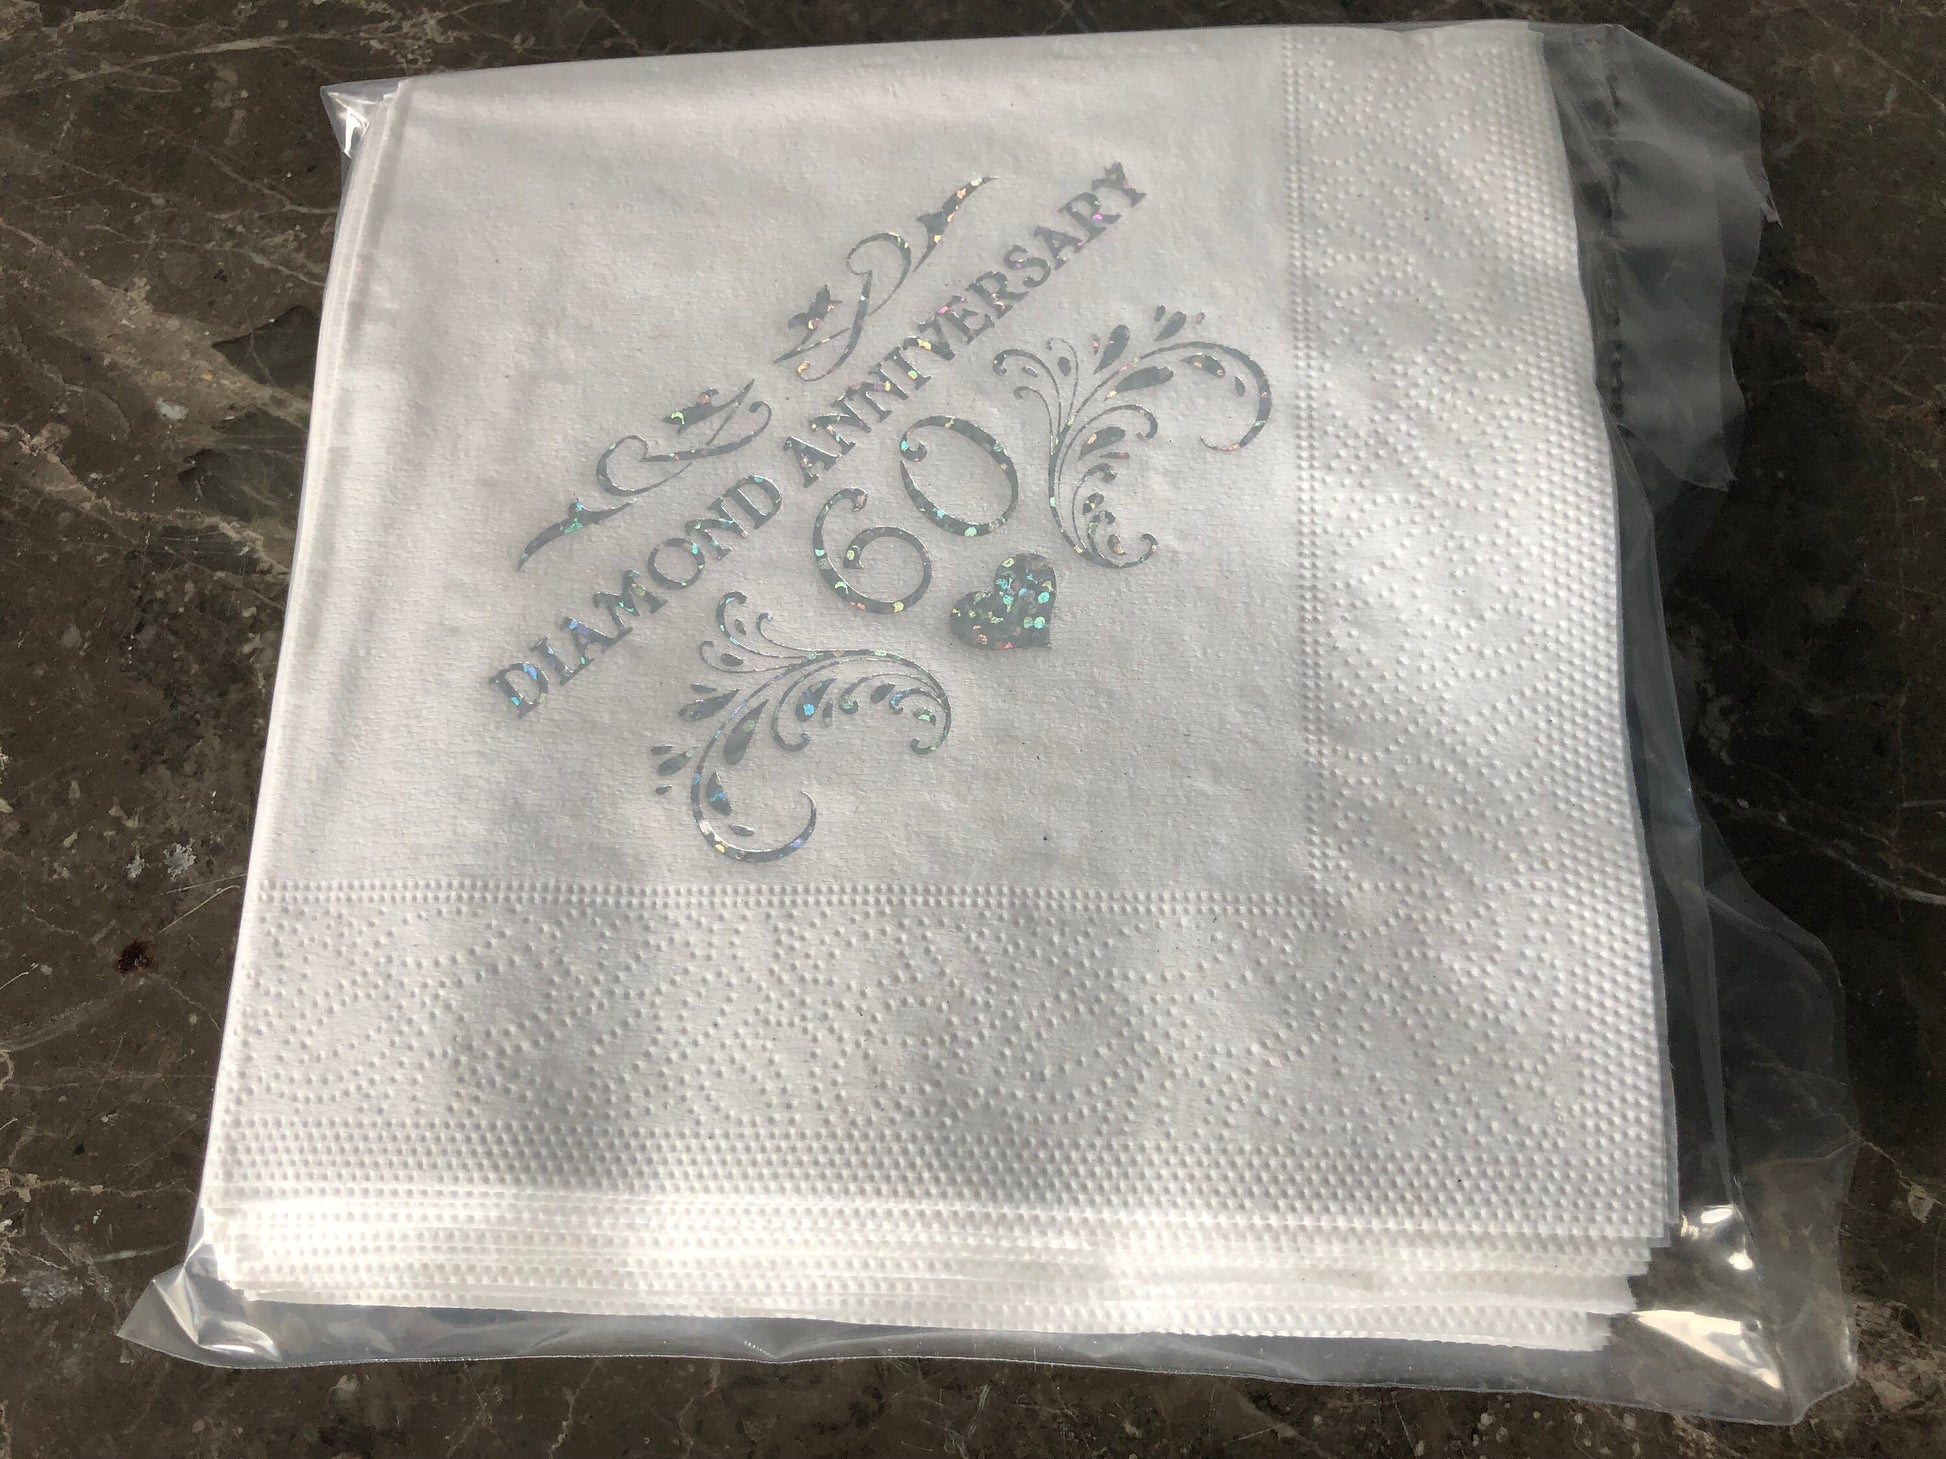 60th Diamond Wedding Anniversary Cocktail Napkins serviettes recycled paper with sparkling foil printed design